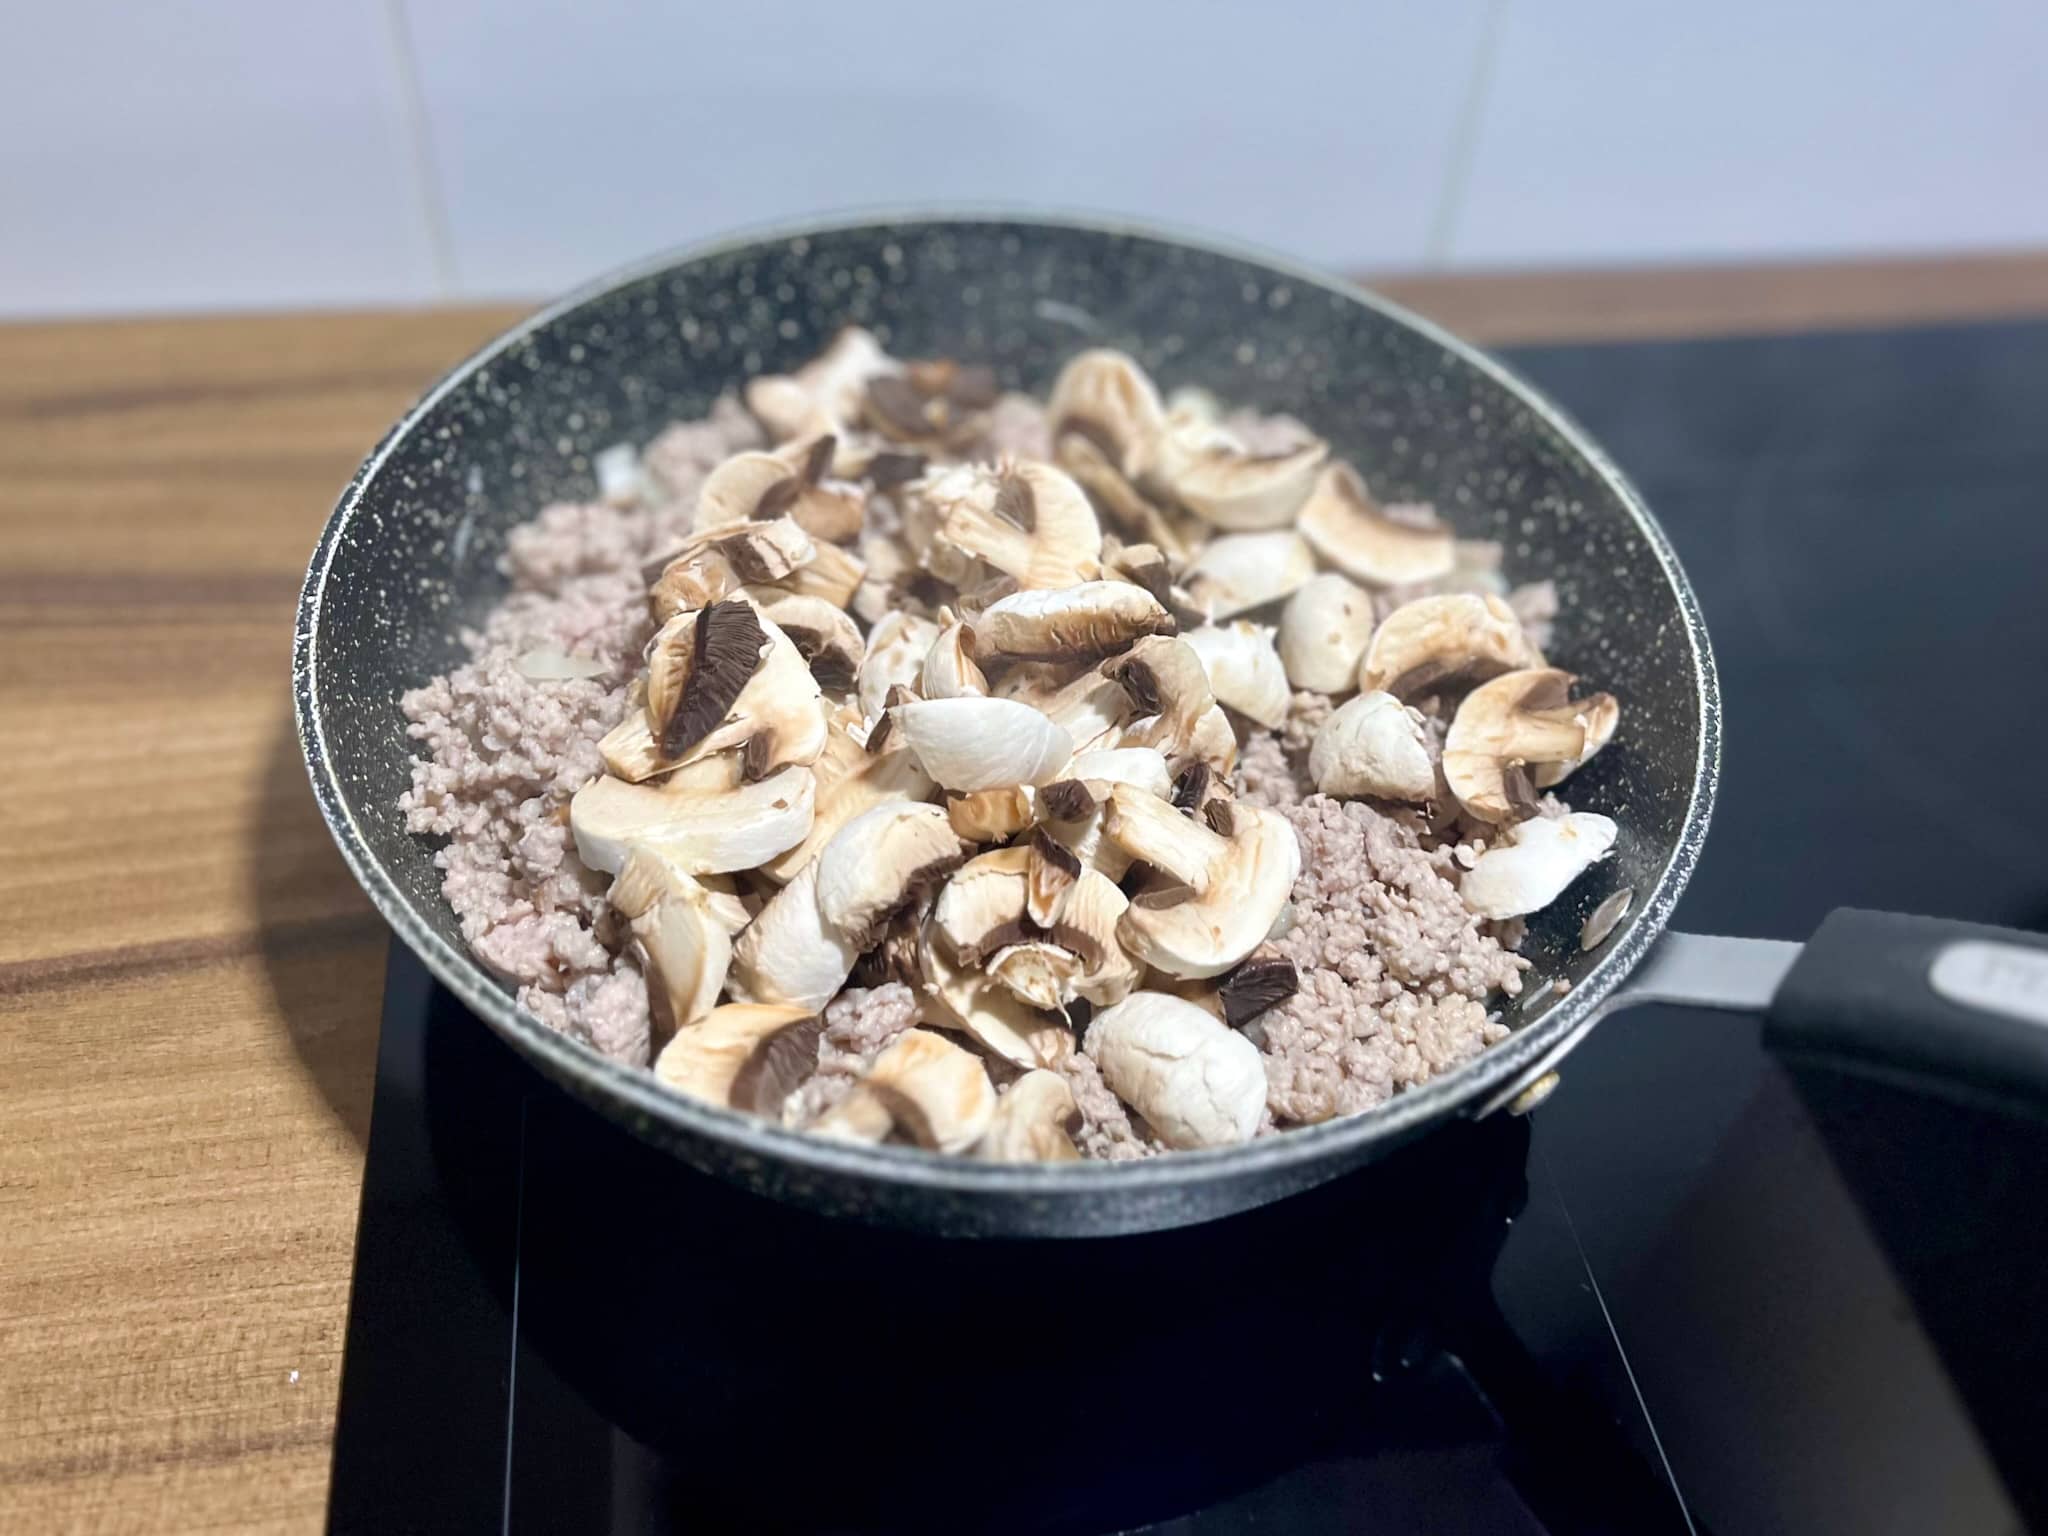 Cooking minced pork with onion, garlic and mushrooms